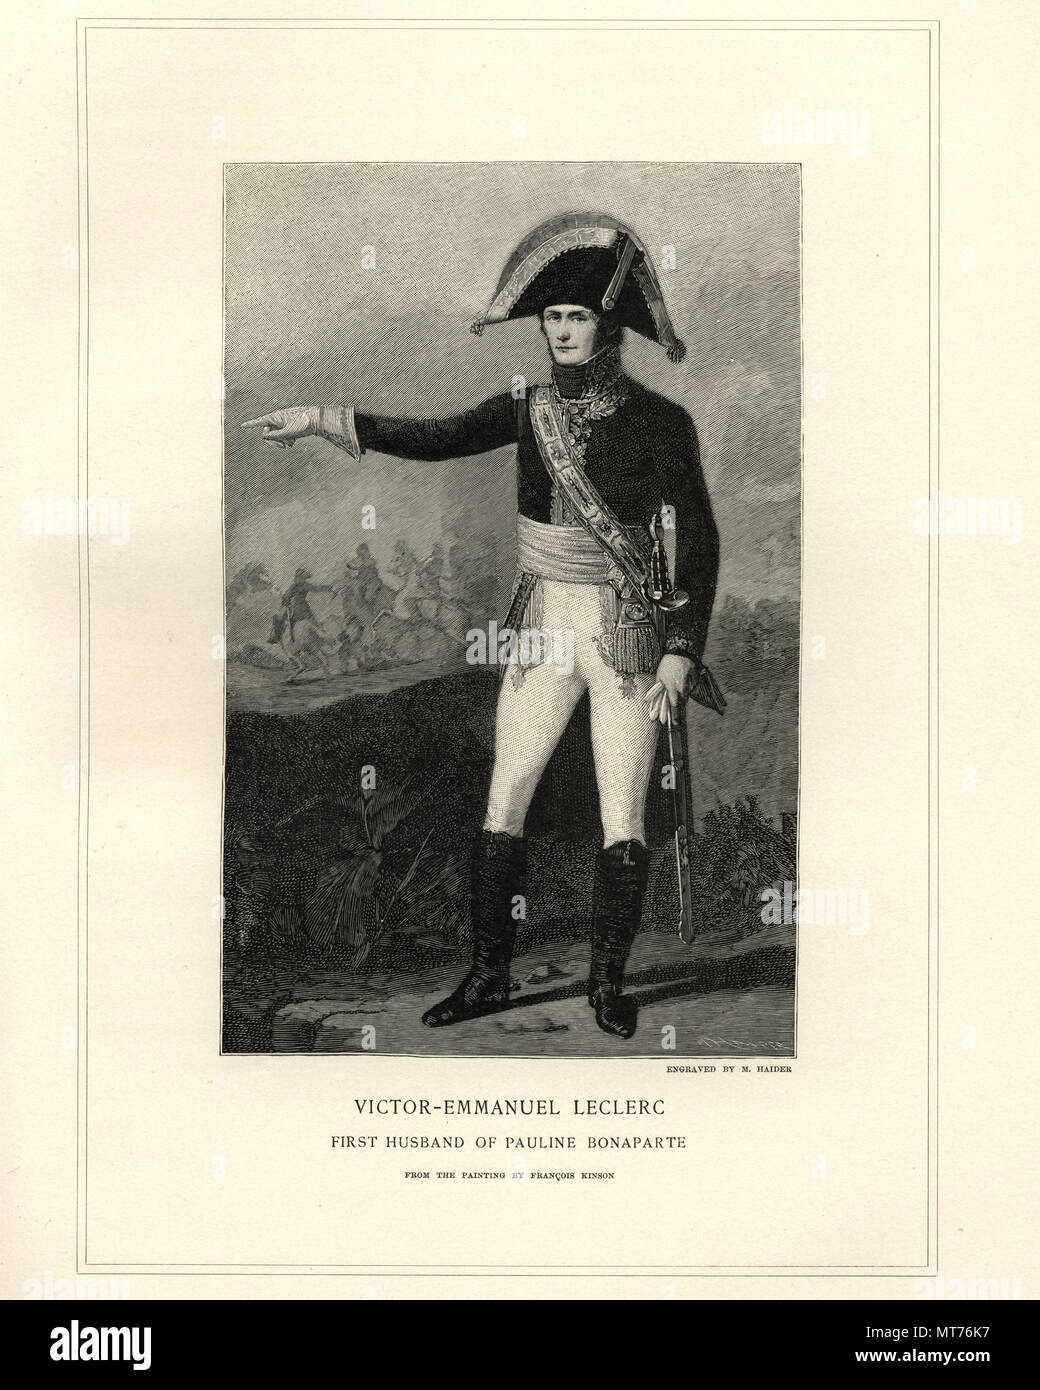 Vintage engraving of Charles Victoire Emmanuel Leclerc (17 March 1772, Pontoise to 2 November 1802) was a French Army general who served under Napoleo Stock Photo